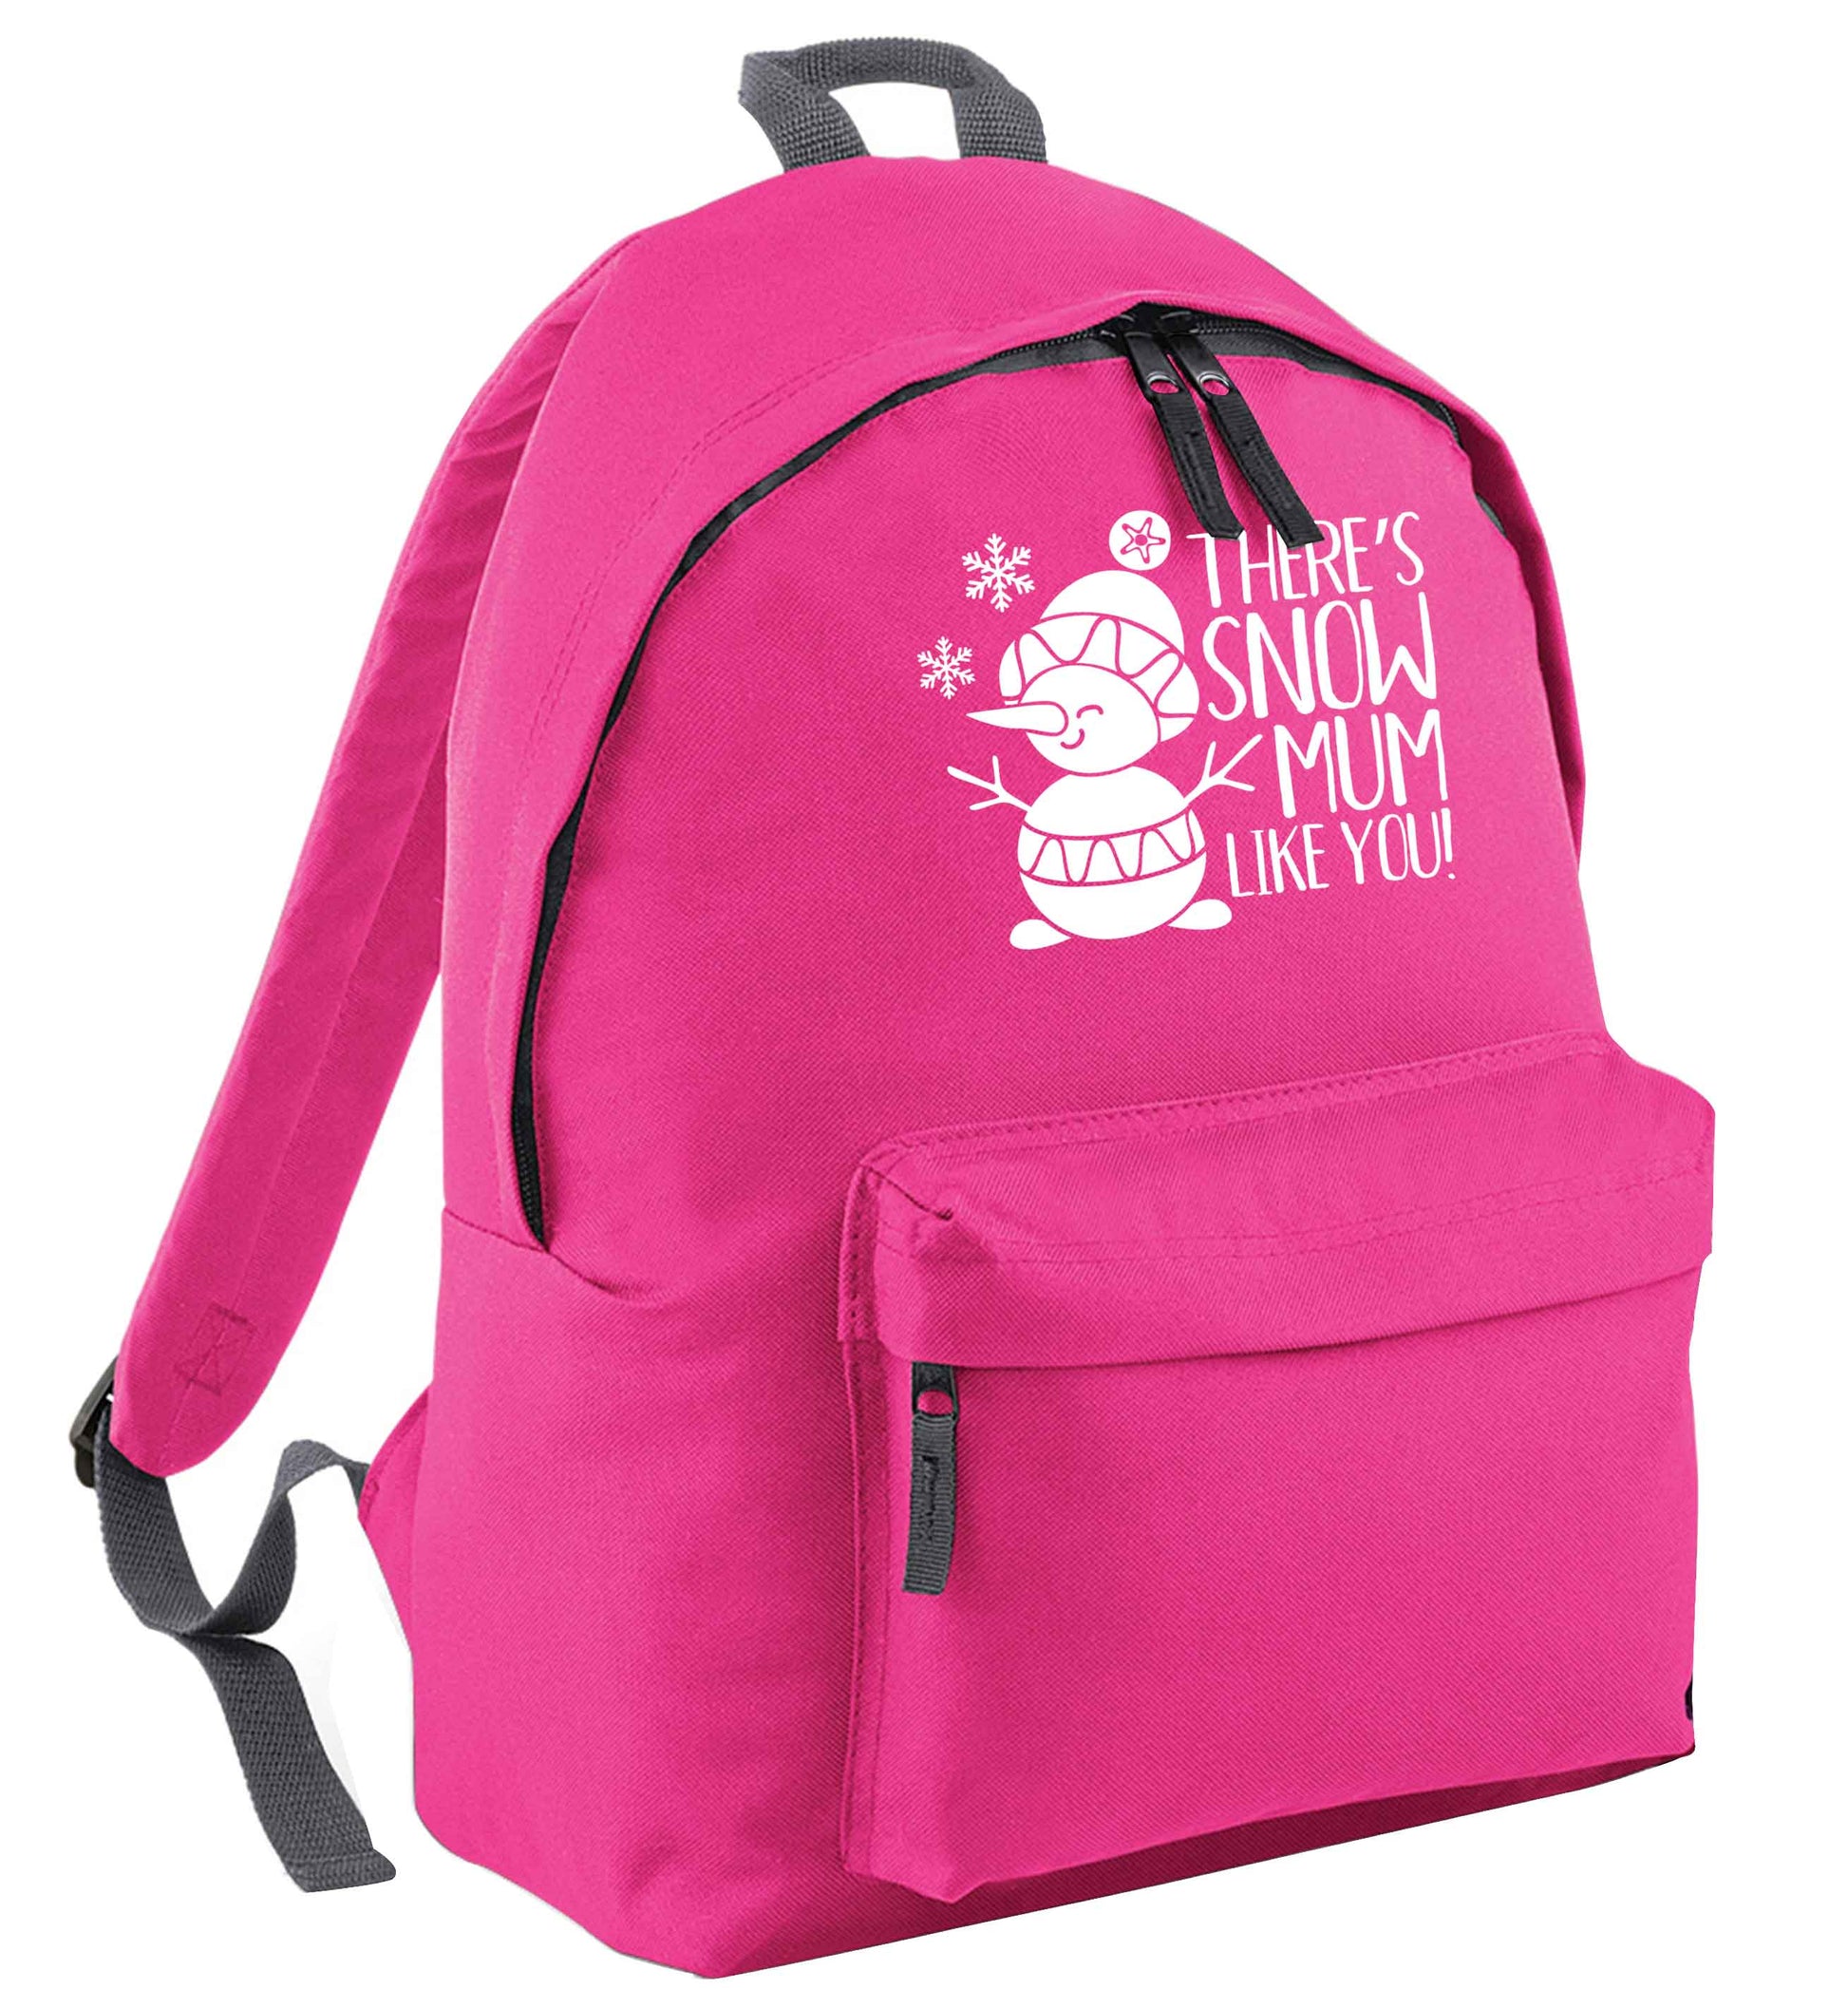 There's snow mum like you pink adults backpack